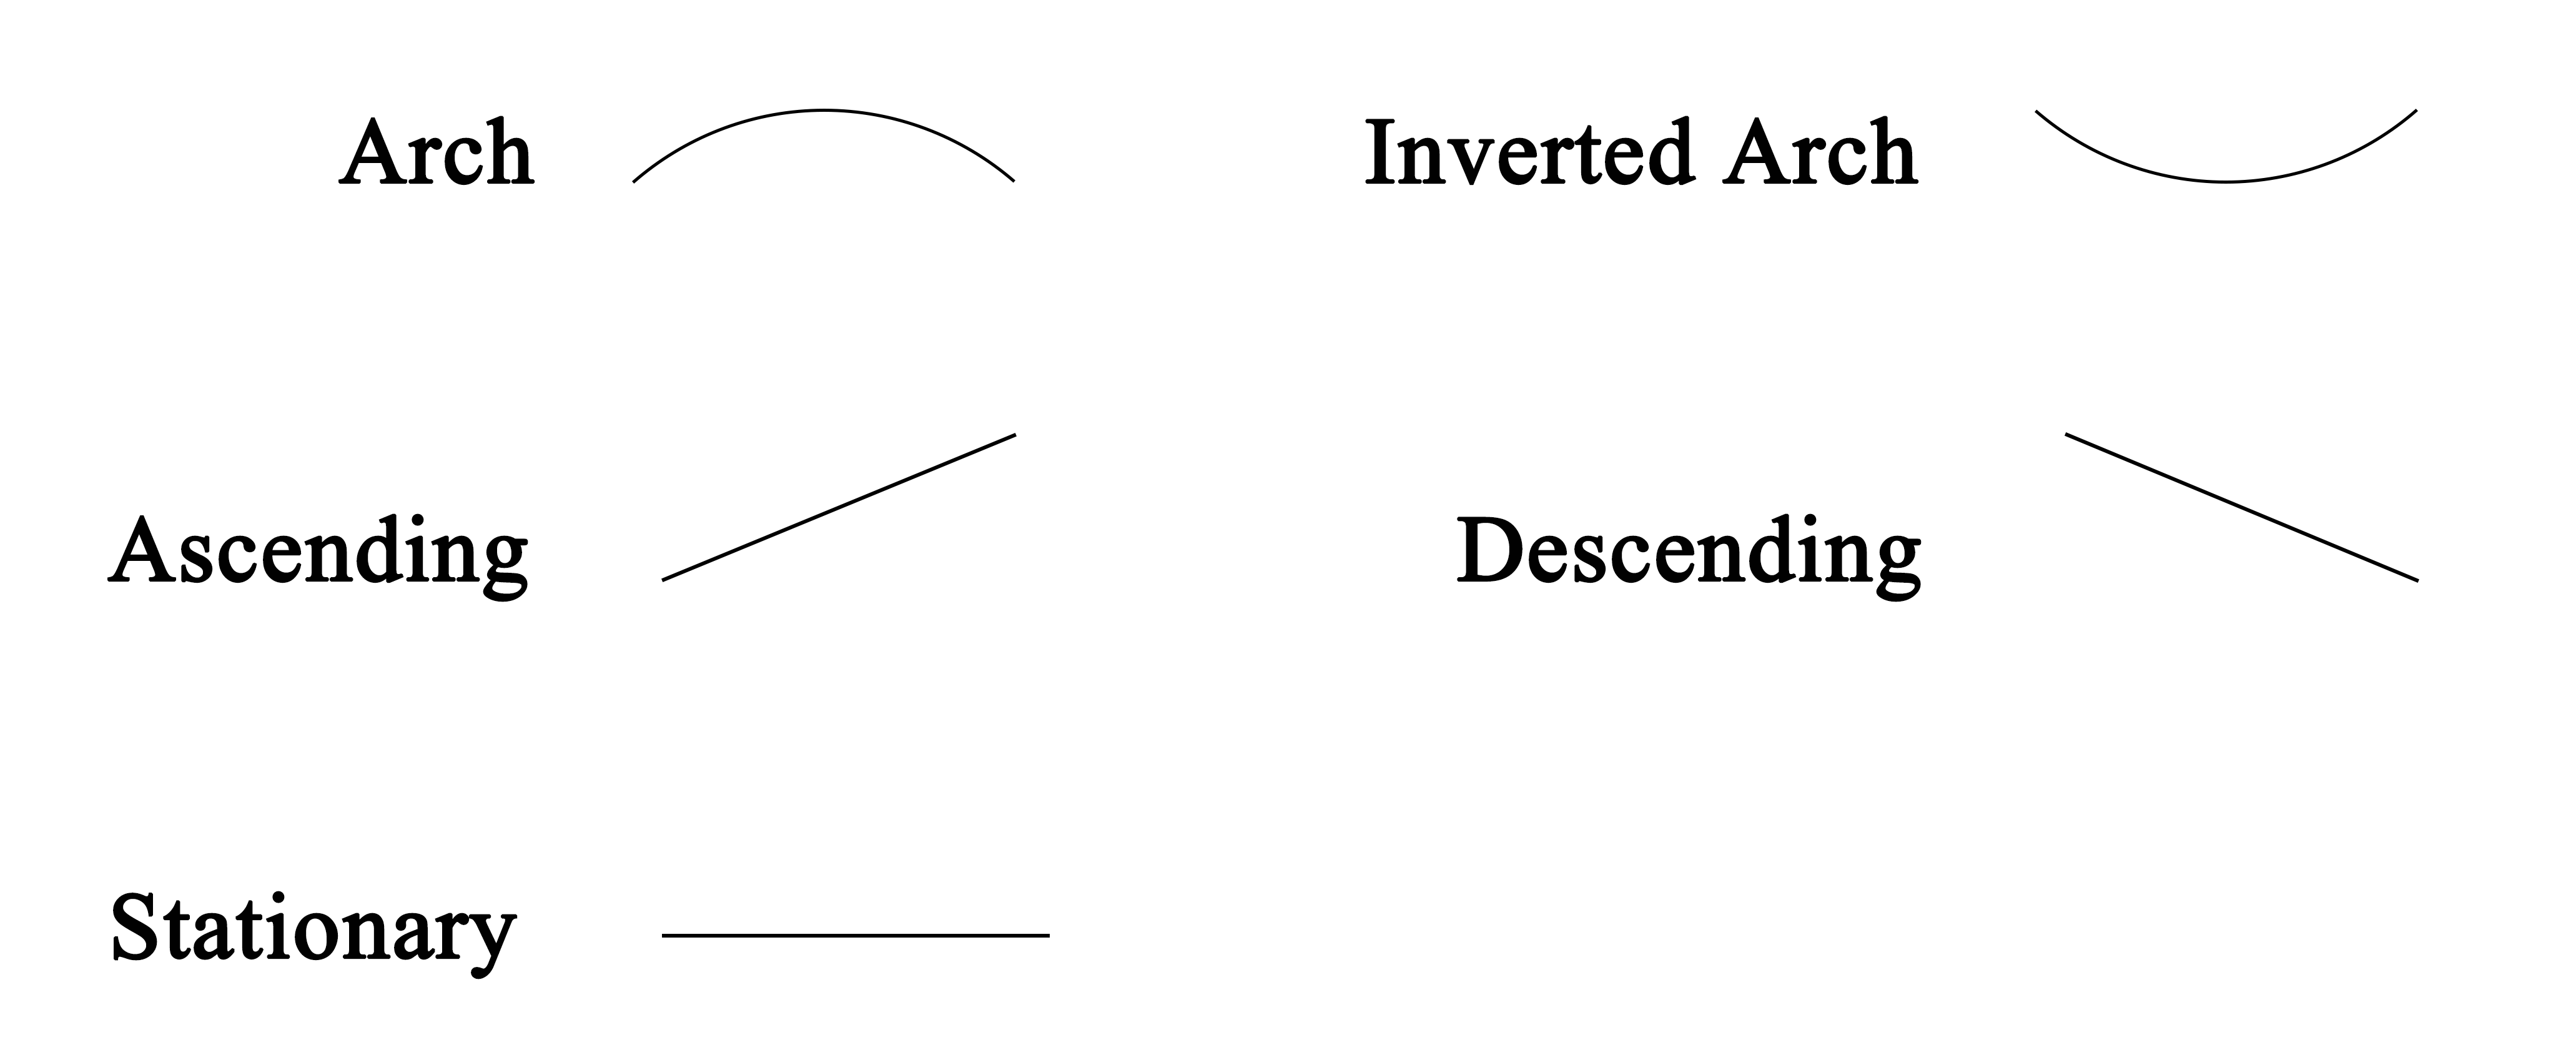 Shapes for arch, inverted arch, ascending, descending, and stationary lines are shown.